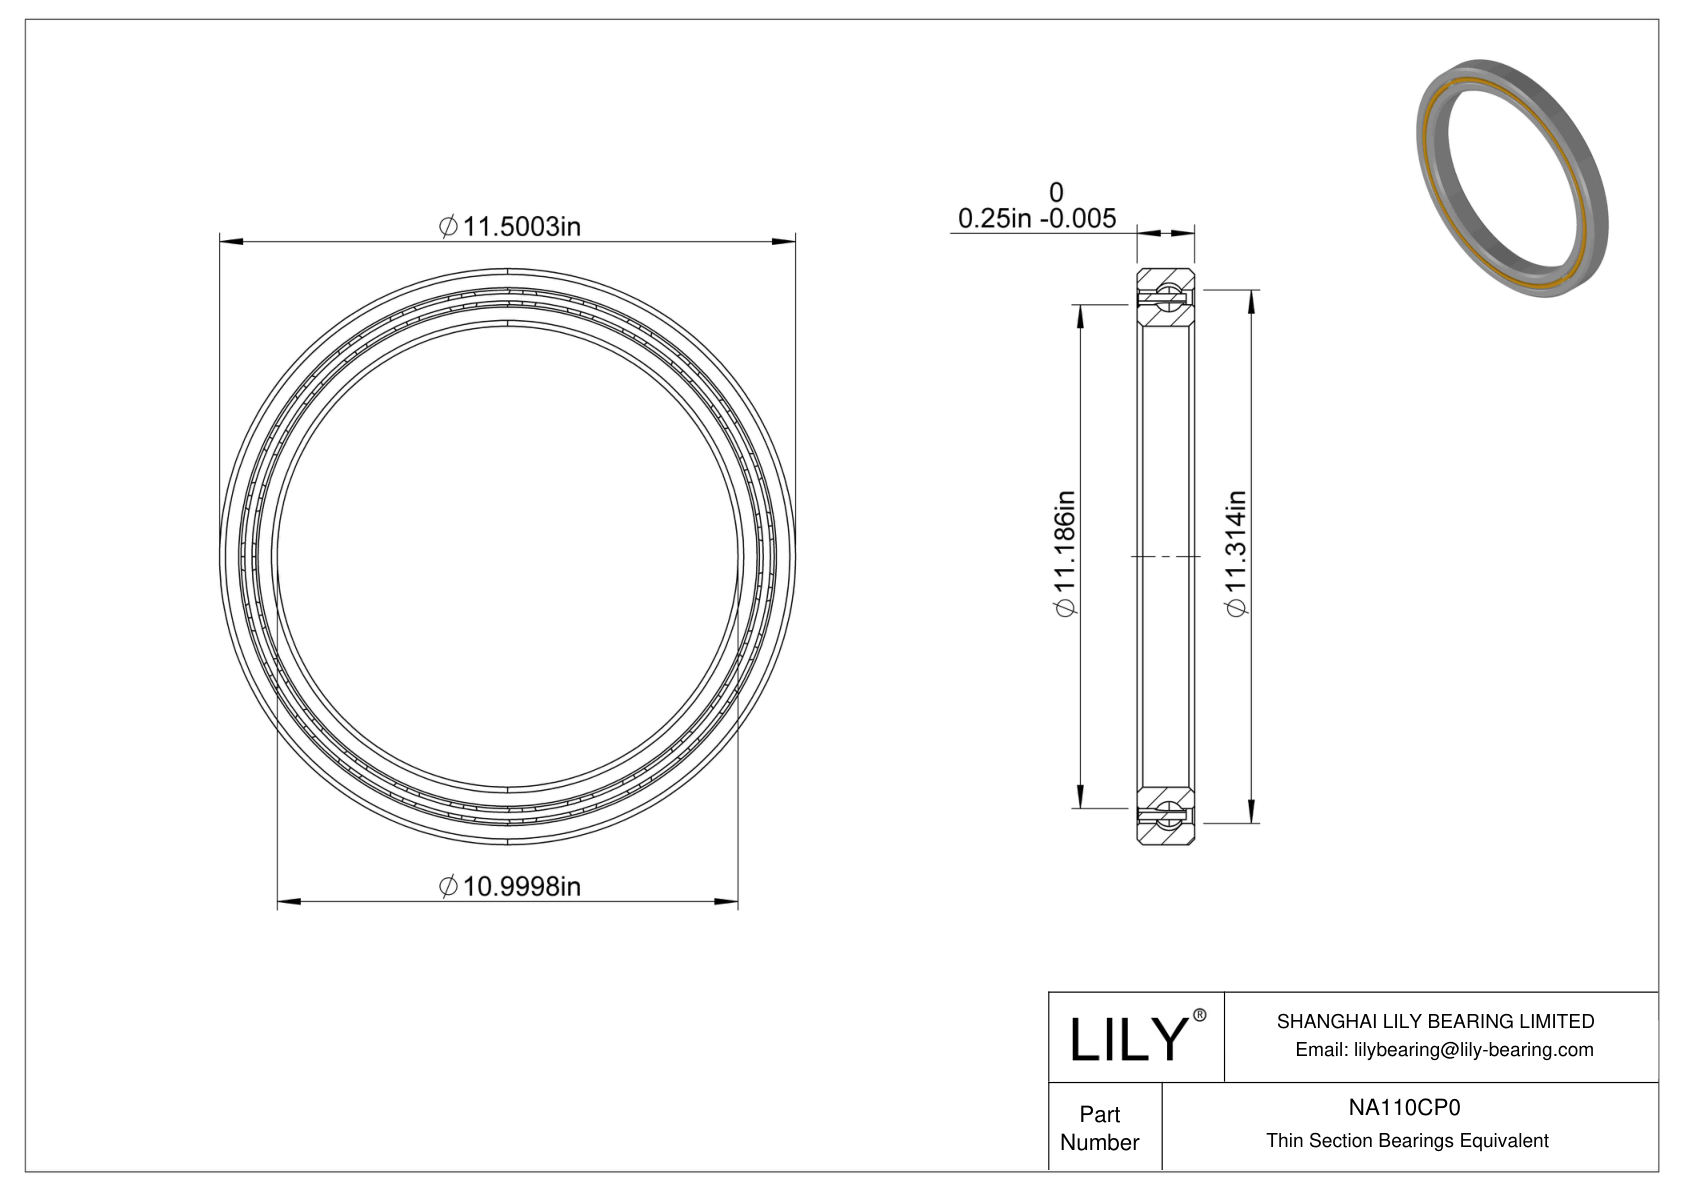 NA110CP0 Constant Section (CS) Bearings cad drawing